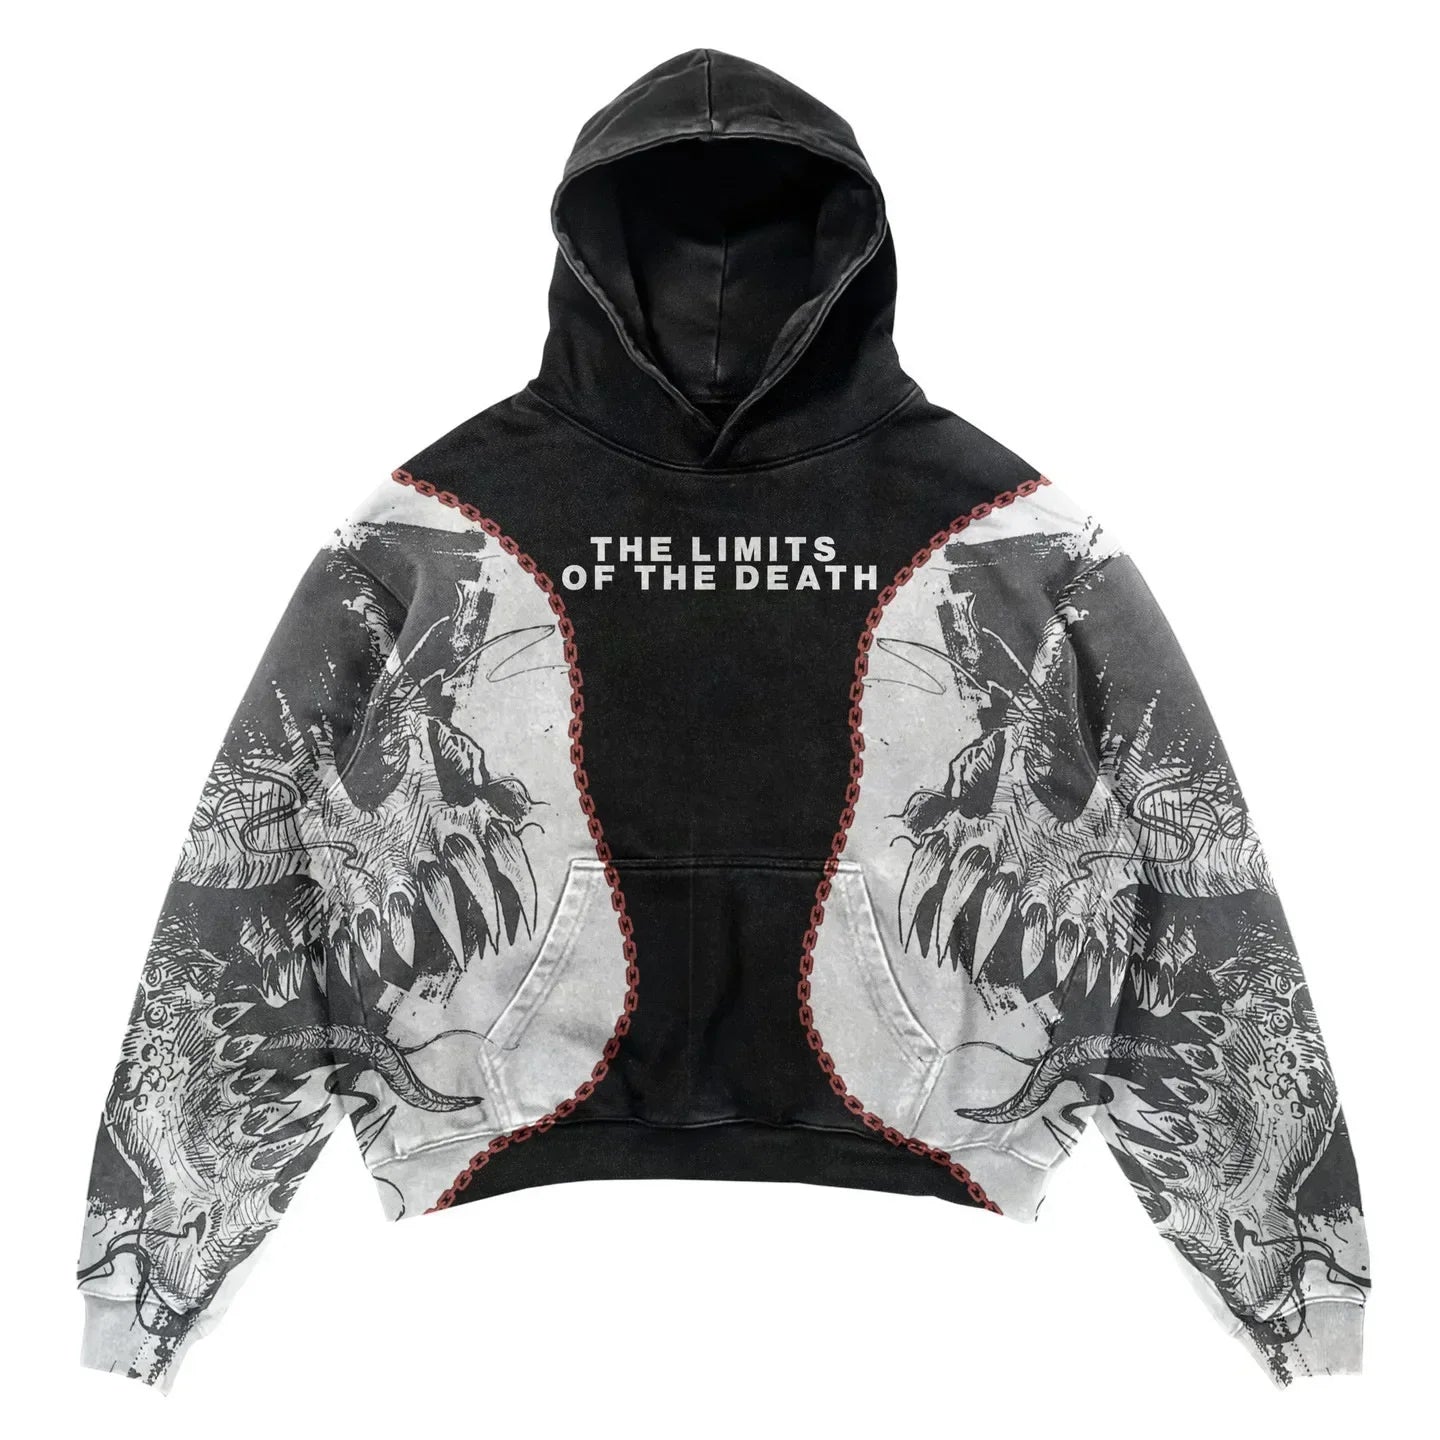 A black Maramalive™ Explosions Printed Skull Y2K Retro Hooded Sweater Coat Street Style Gothic Casual Fashion Hooded Sweater Men's Female embodying punk style, featuring the text "THE LIMITS OF THE DEATH" on the front, with intricate artistic prints of snarling monster faces on the sleeves and lower torso—a standout piece in men's fashion.